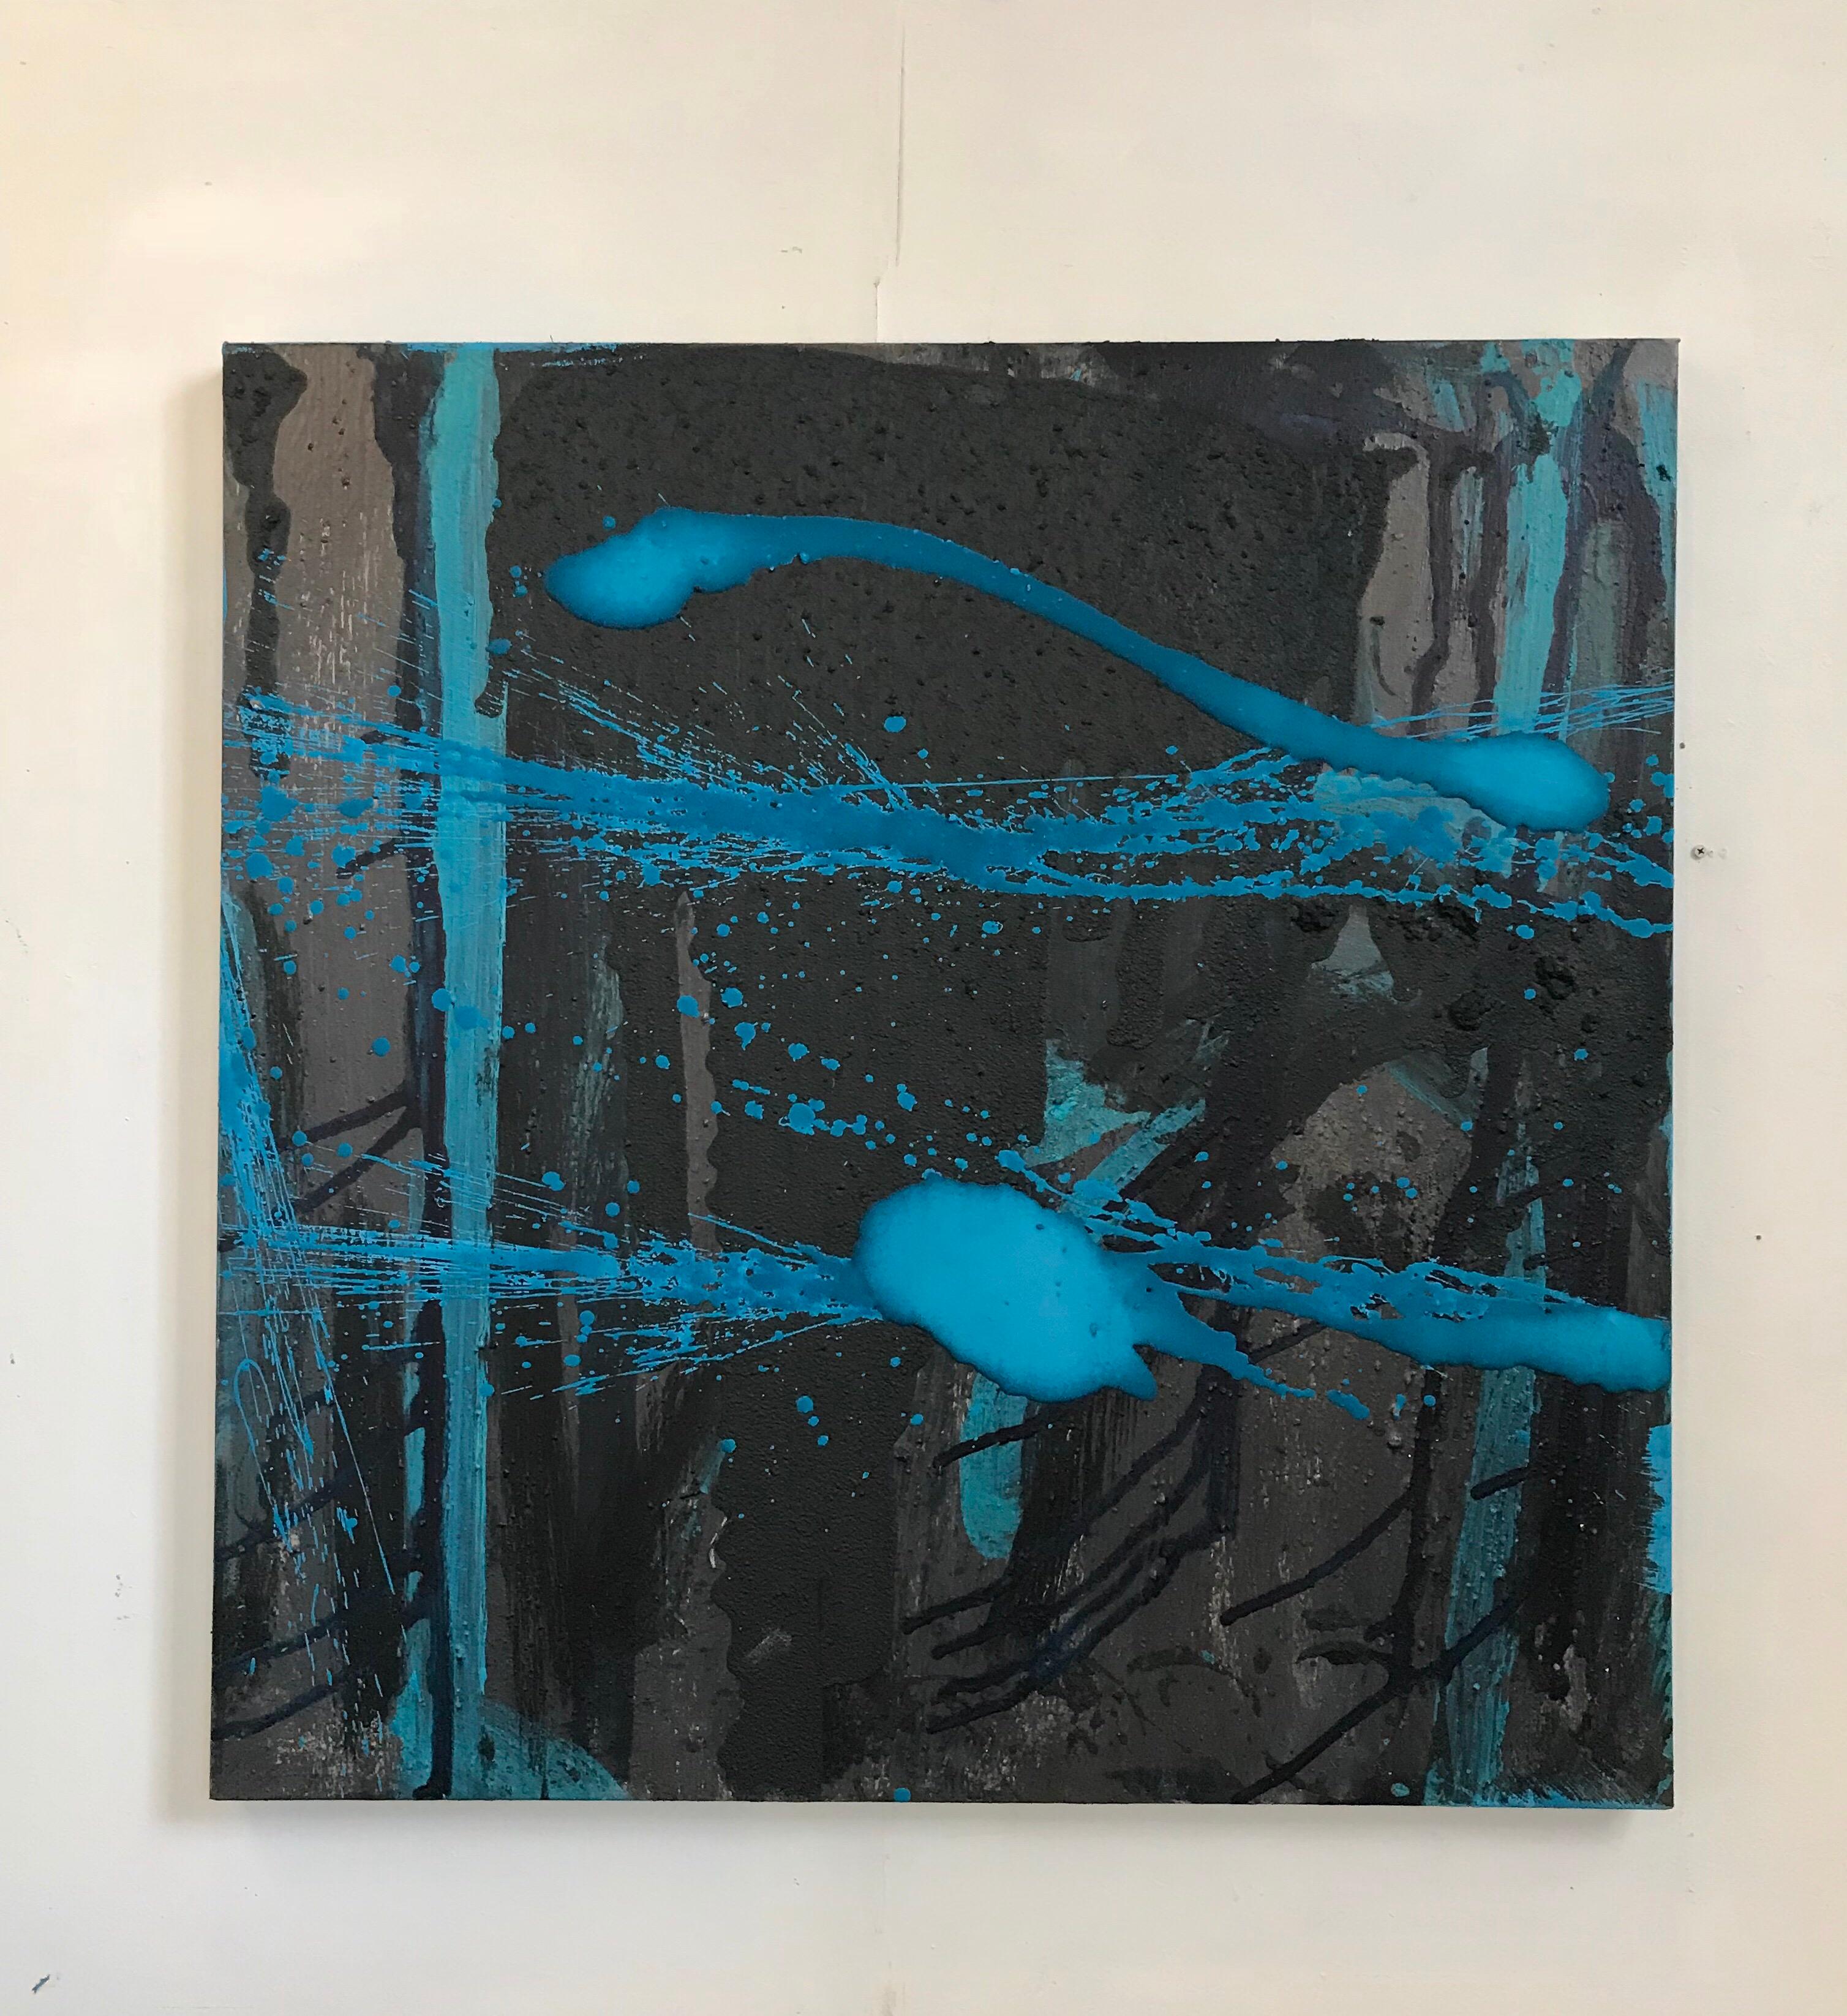 An abstract painting and fluid plaster study in deep browns and grays with vibrant top splatter layers of other worldly blue hues. Simple and organic abstract painting with no heavy handed intent. There is a twin plaster wash available as well as we